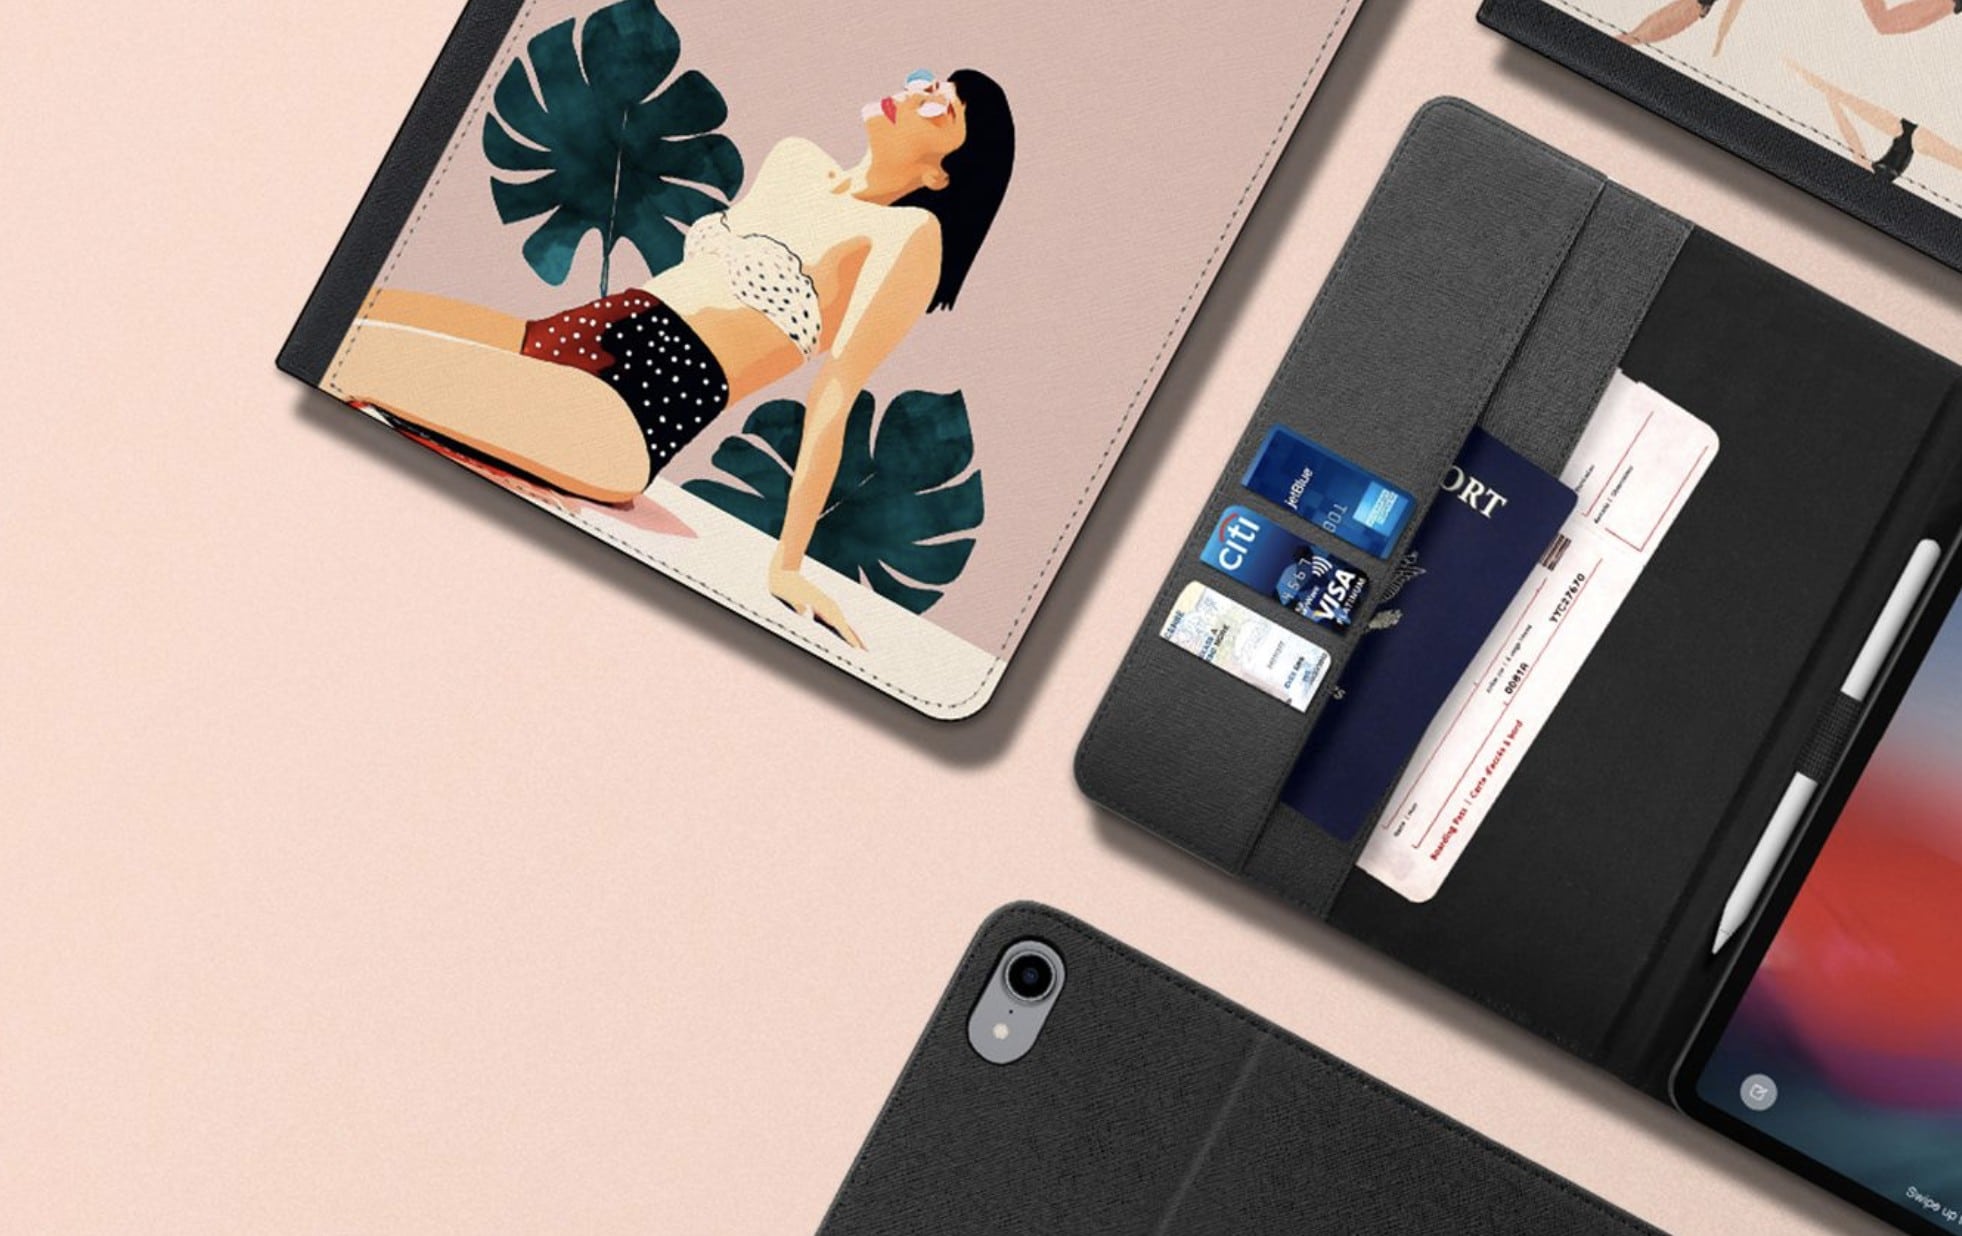 Casetify's awesome new iPad cases make room for essential documents